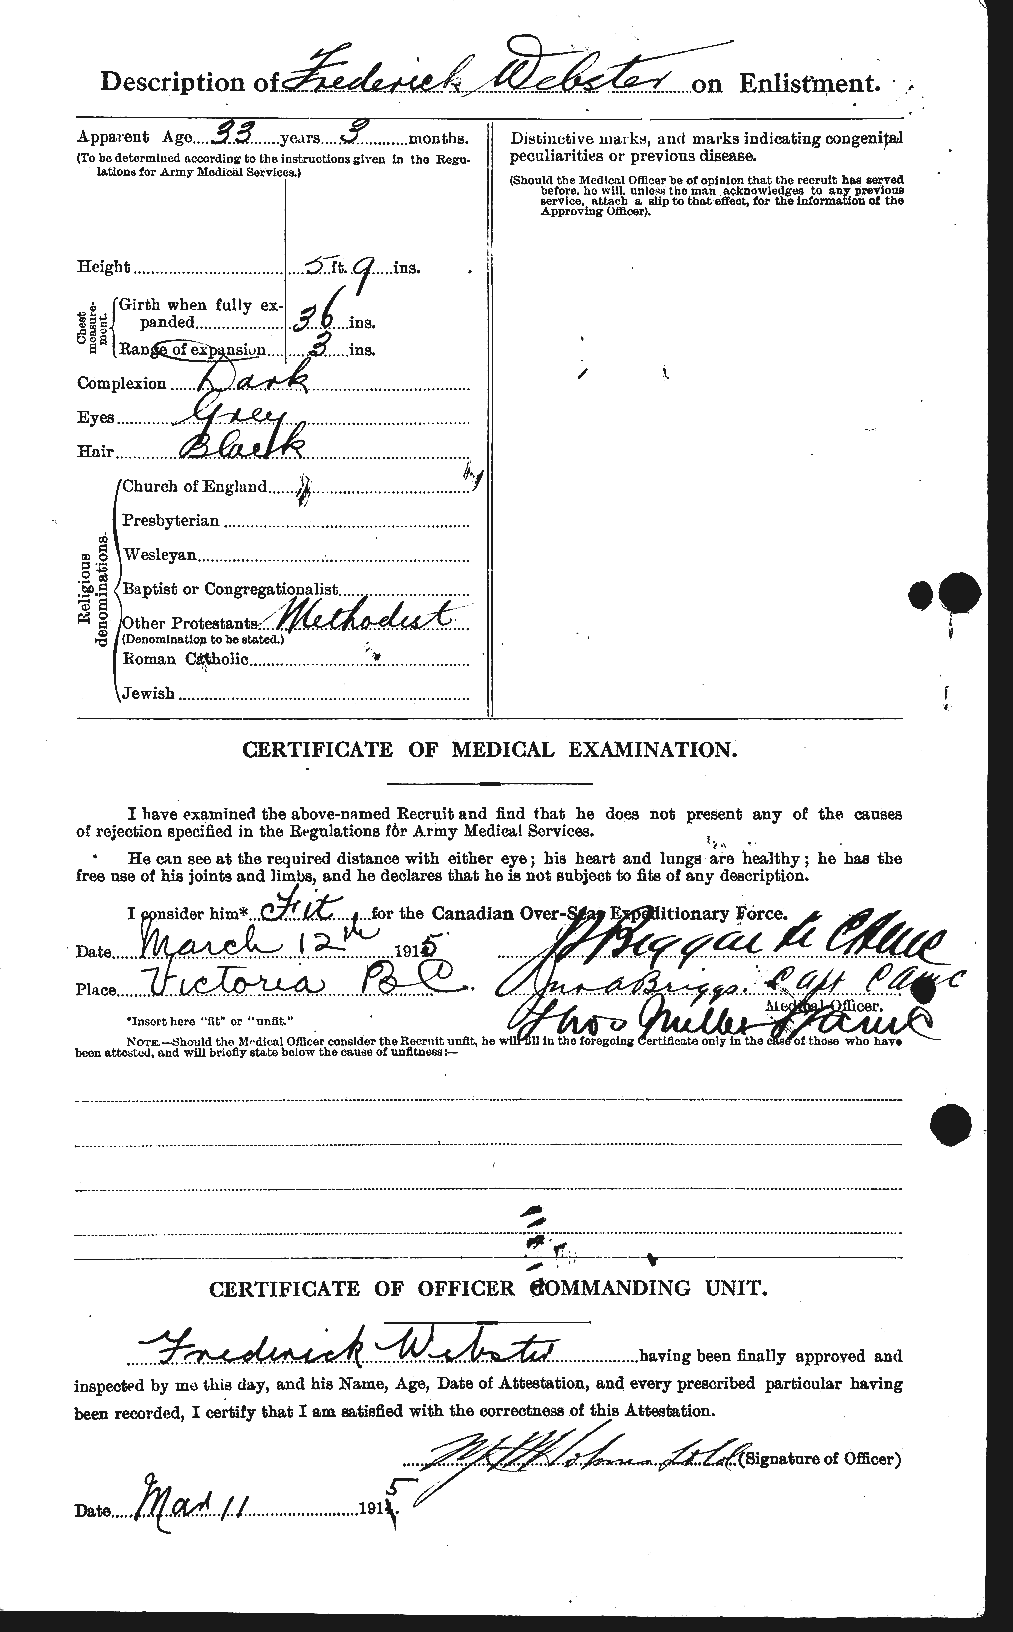 Personnel Records of the First World War - CEF 670359b